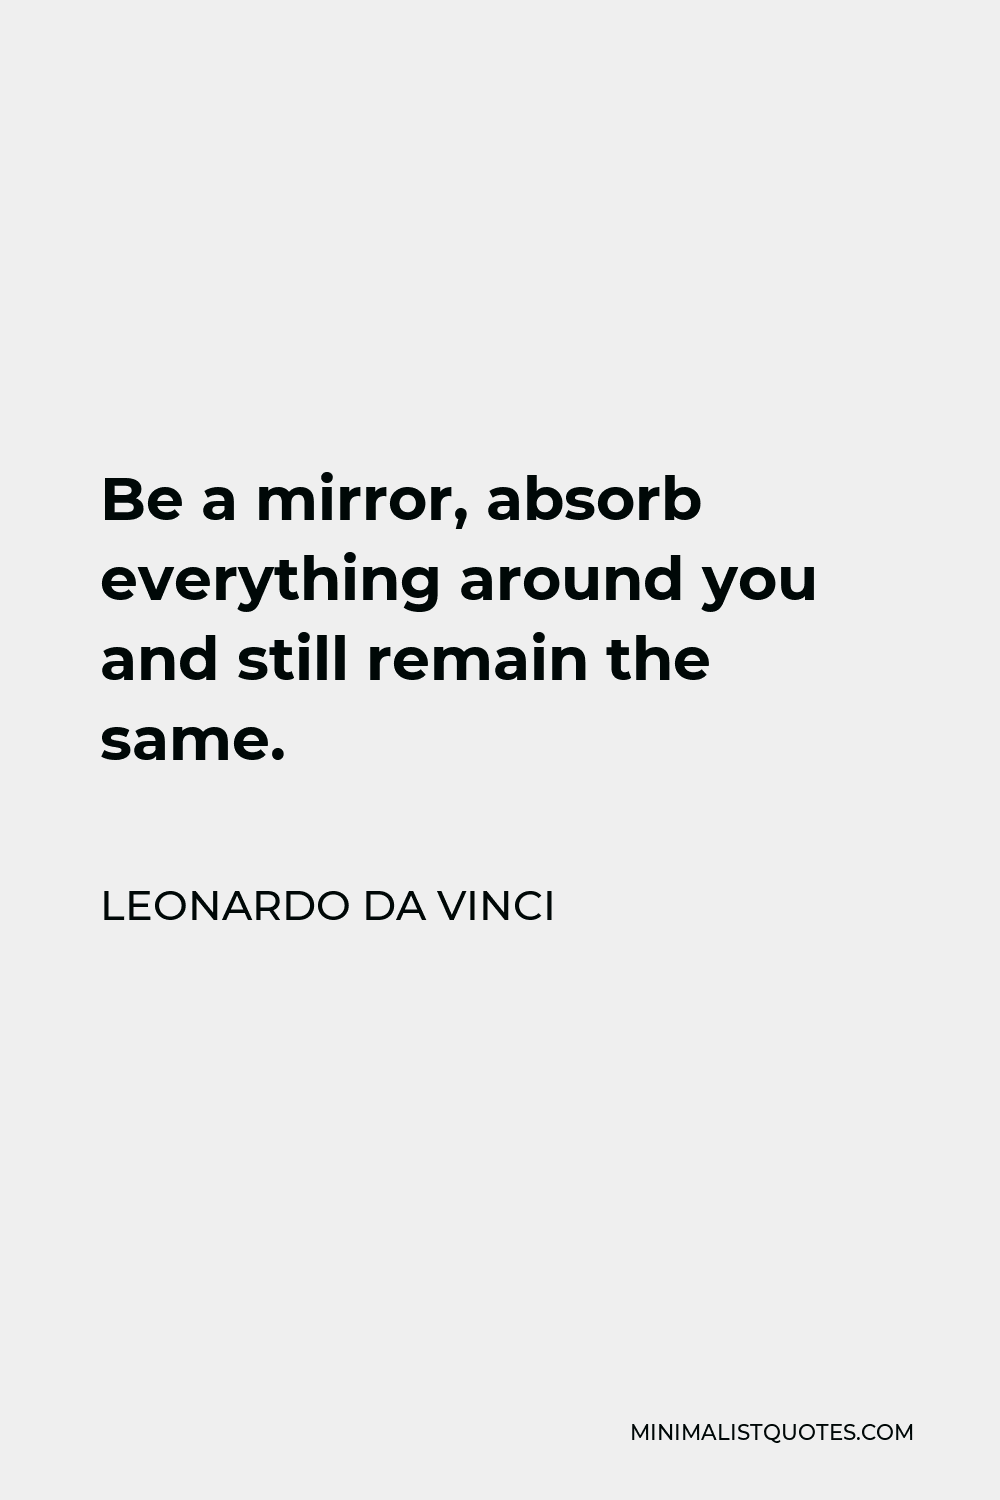 Leonardo da Vinci Quote - Be a mirror, absorb everything around you and still remain the same.